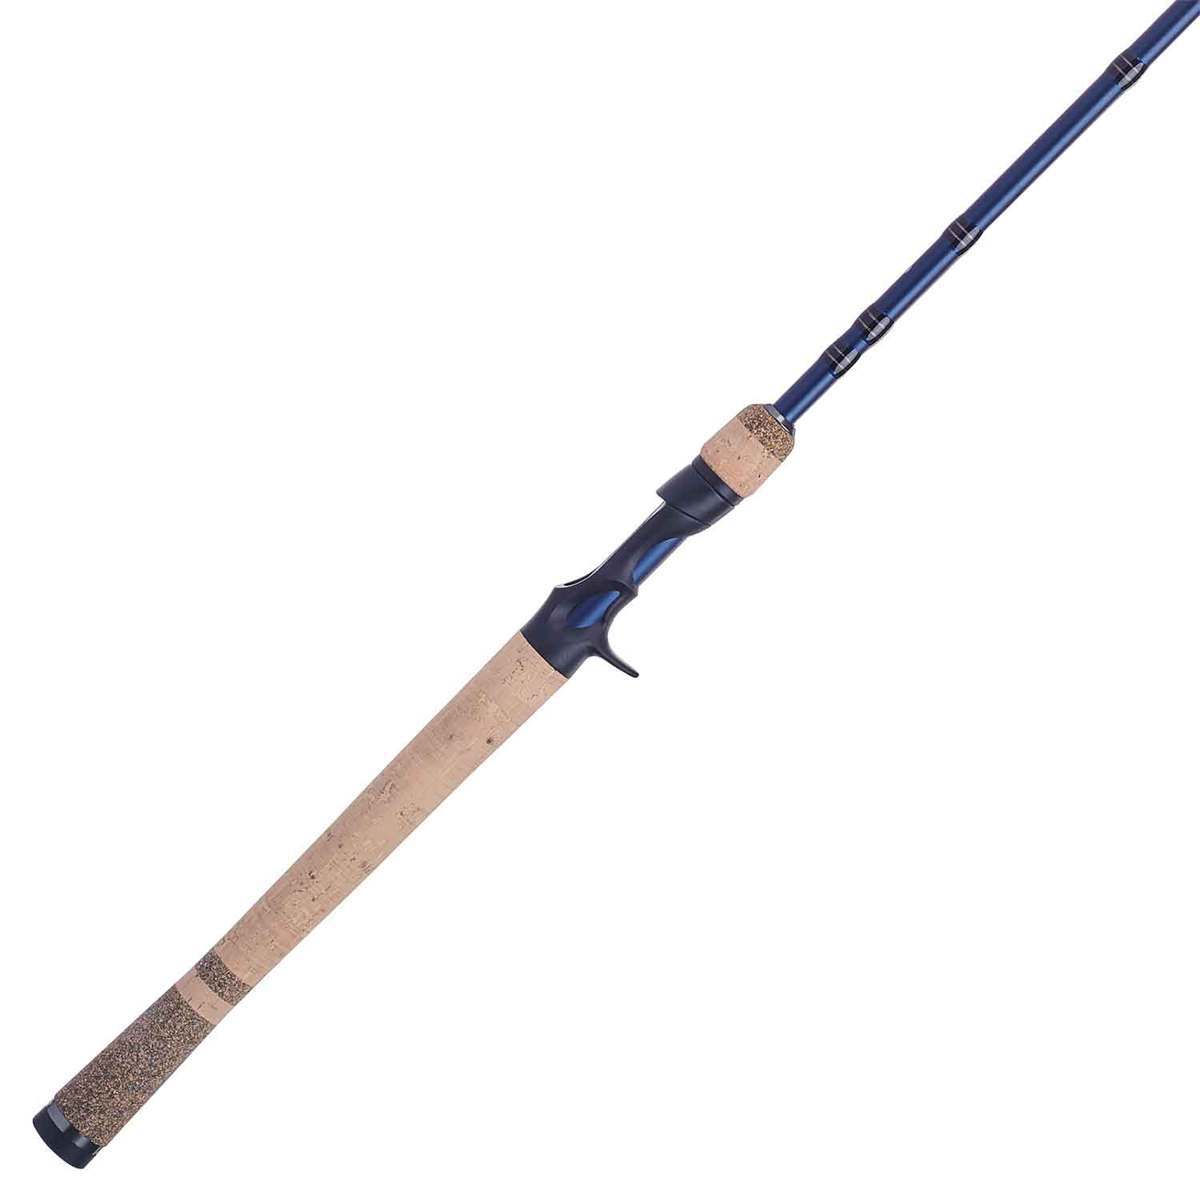 Fenwick Eagle Casting Rod - 9ft 6in, Medium Power, Moderate Fast Action,  2pc